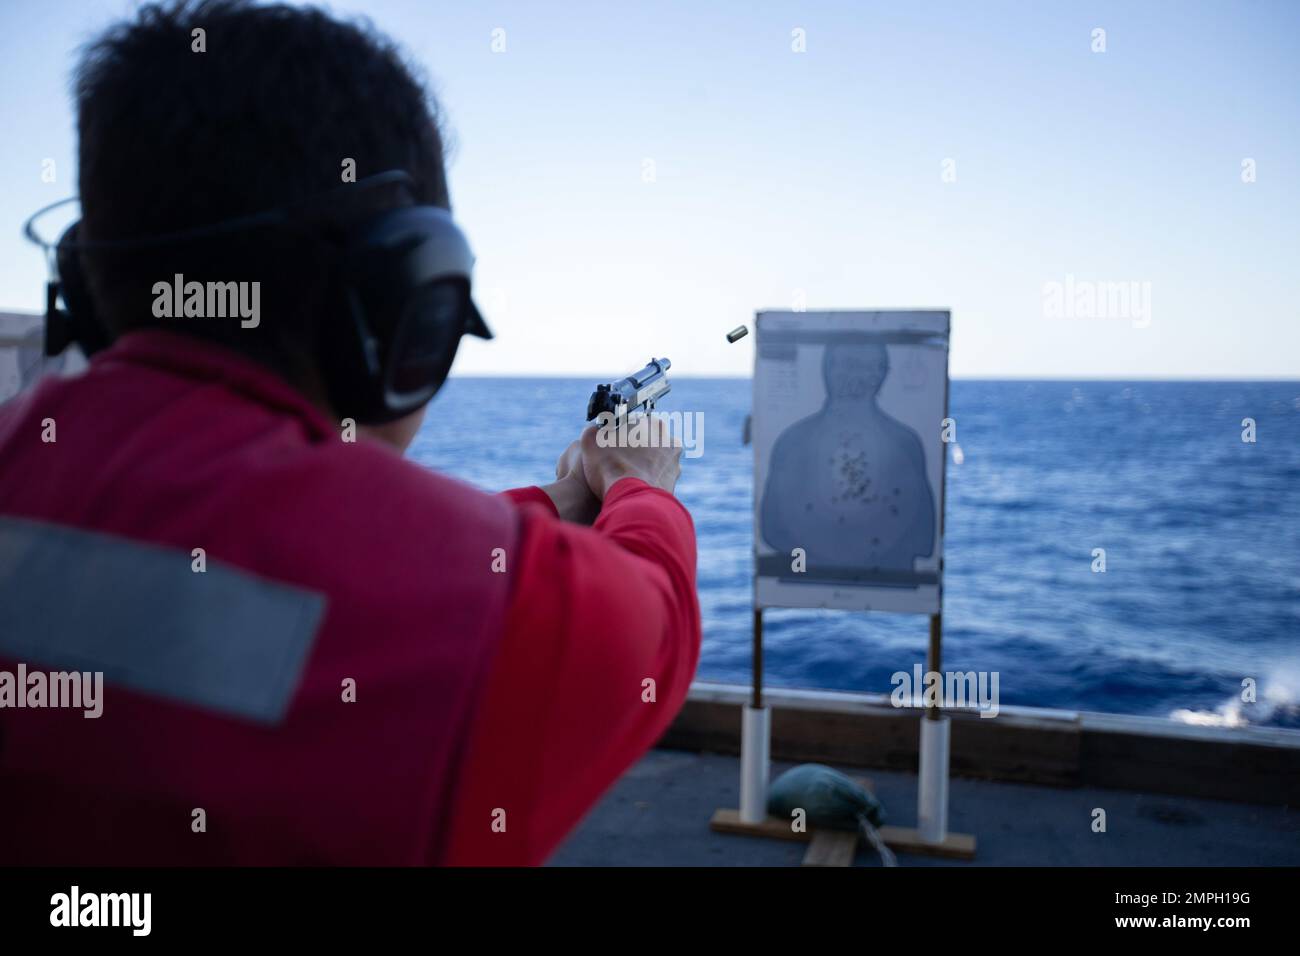 Seaman Nathan Mazza, from Sterling, Virginia, assigned to the first-in-class aircraft carrier USS Gerald R. Ford's (CVN 78) weapons department, fires the M9 pistol during a small arms live fire gunnery exercise on the ship’s aircraft elevator, Oct. 15, 2022. The Gerald R. Ford Carrier Strike Group (GRFCSG) is deployed in the Atlantic Ocean, conducting training and operations alongside NATO Allies and partners to enhance integration for future operations and demonstrate the U.S. Navy’s commitment to a peaceful, stable and conflict-free Atlantic region. Stock Photo